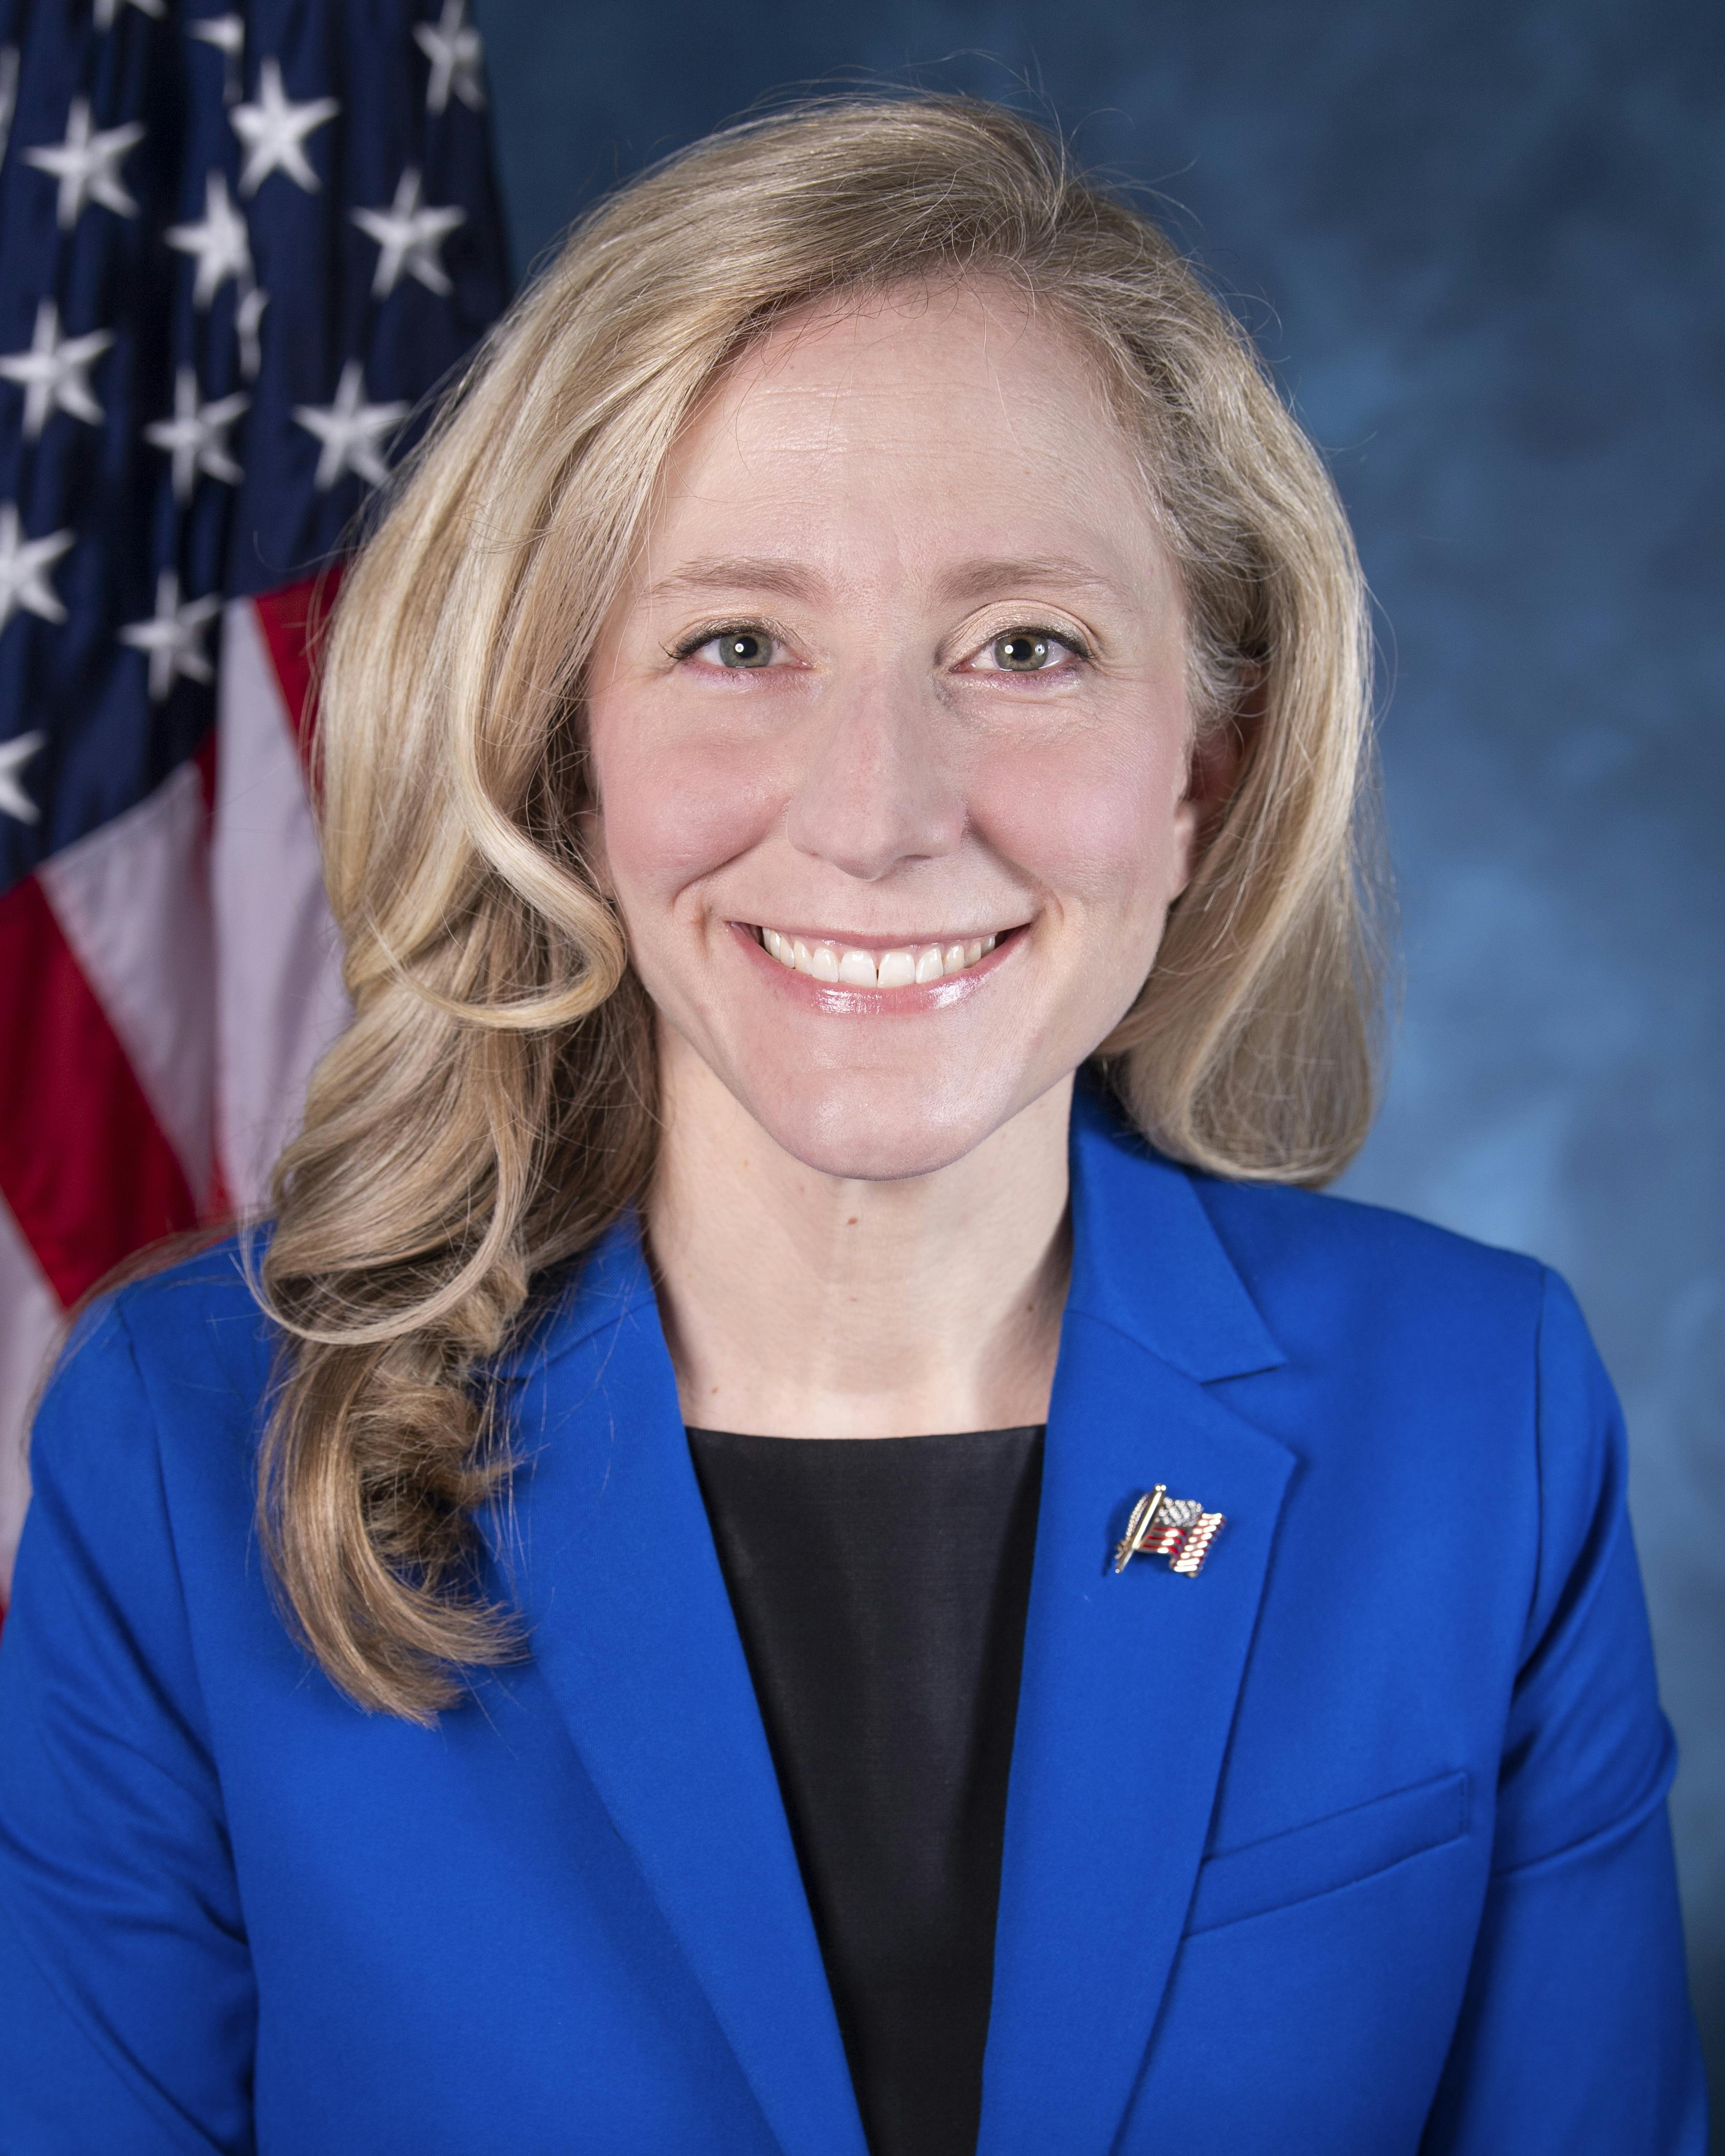 Profile picture of Abigail Spanberger